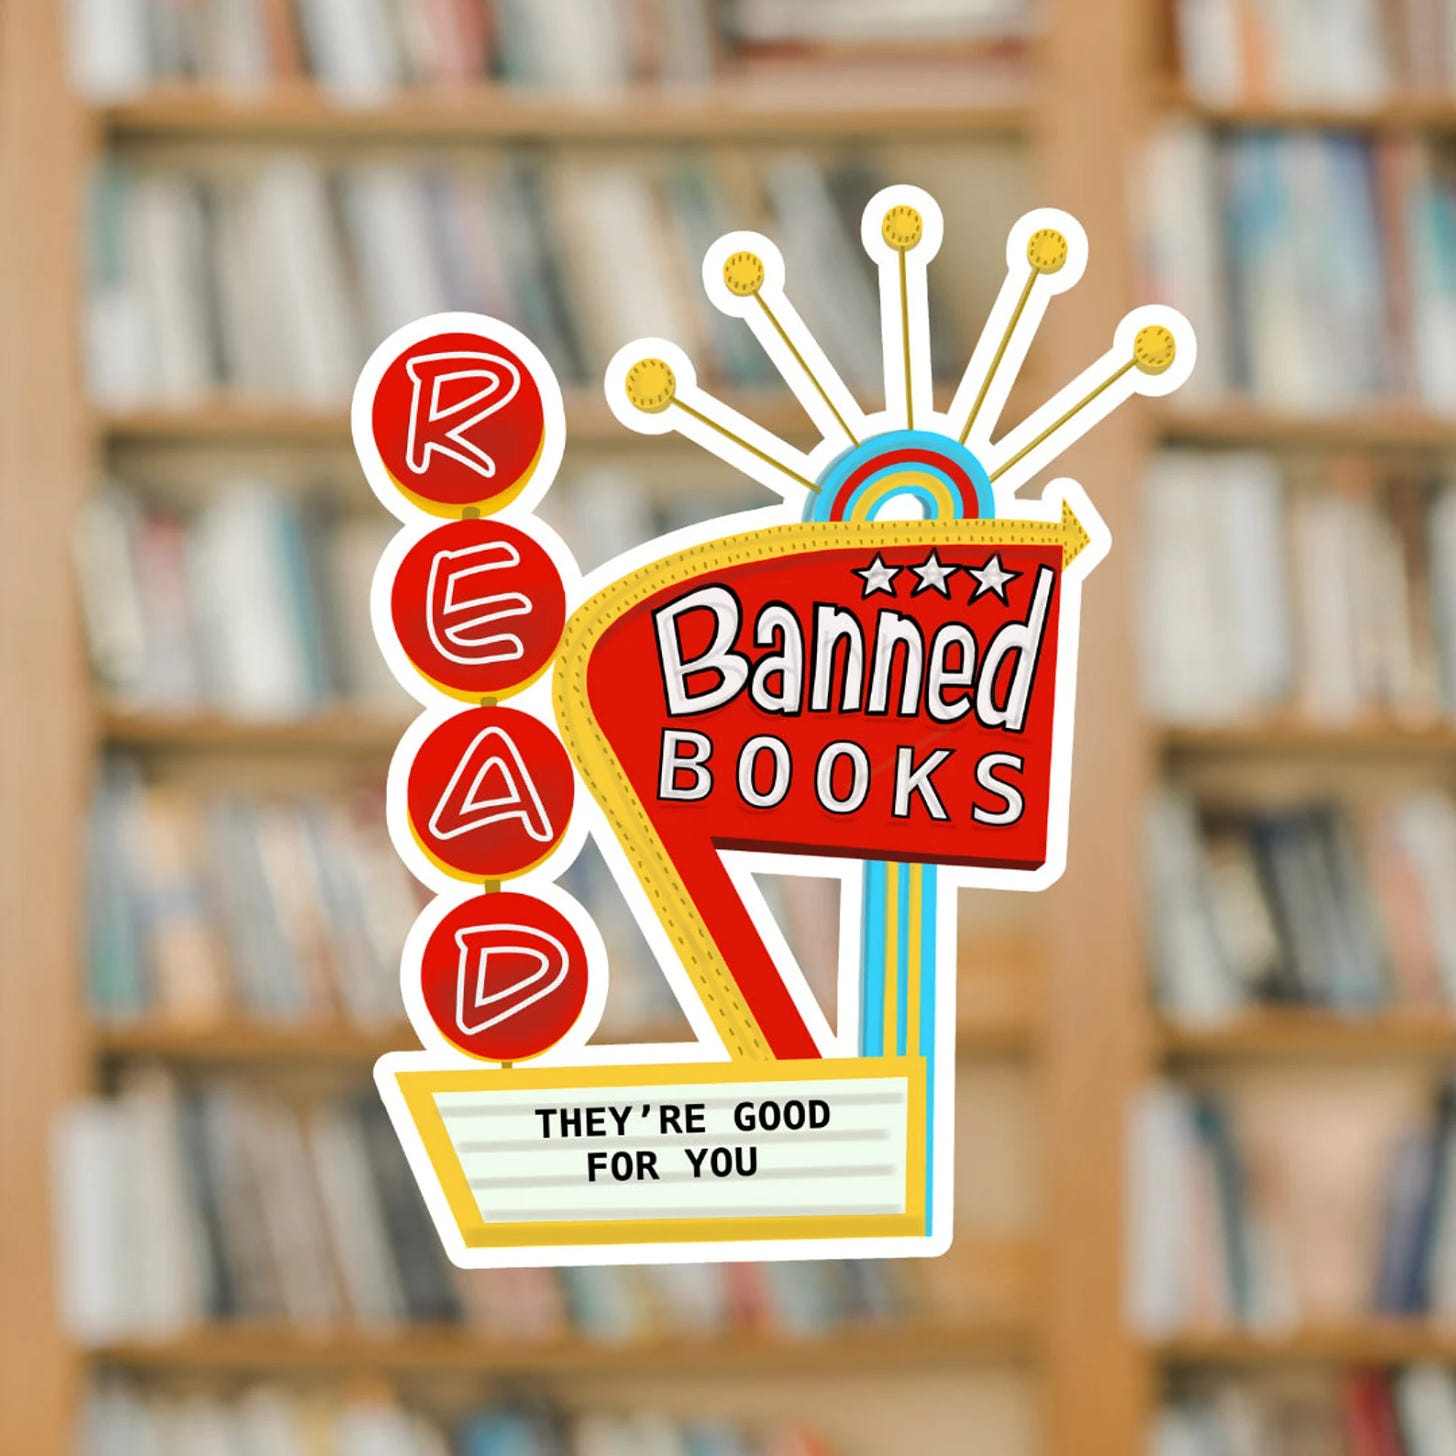 read banned books sticker in the style of an old neon sign.